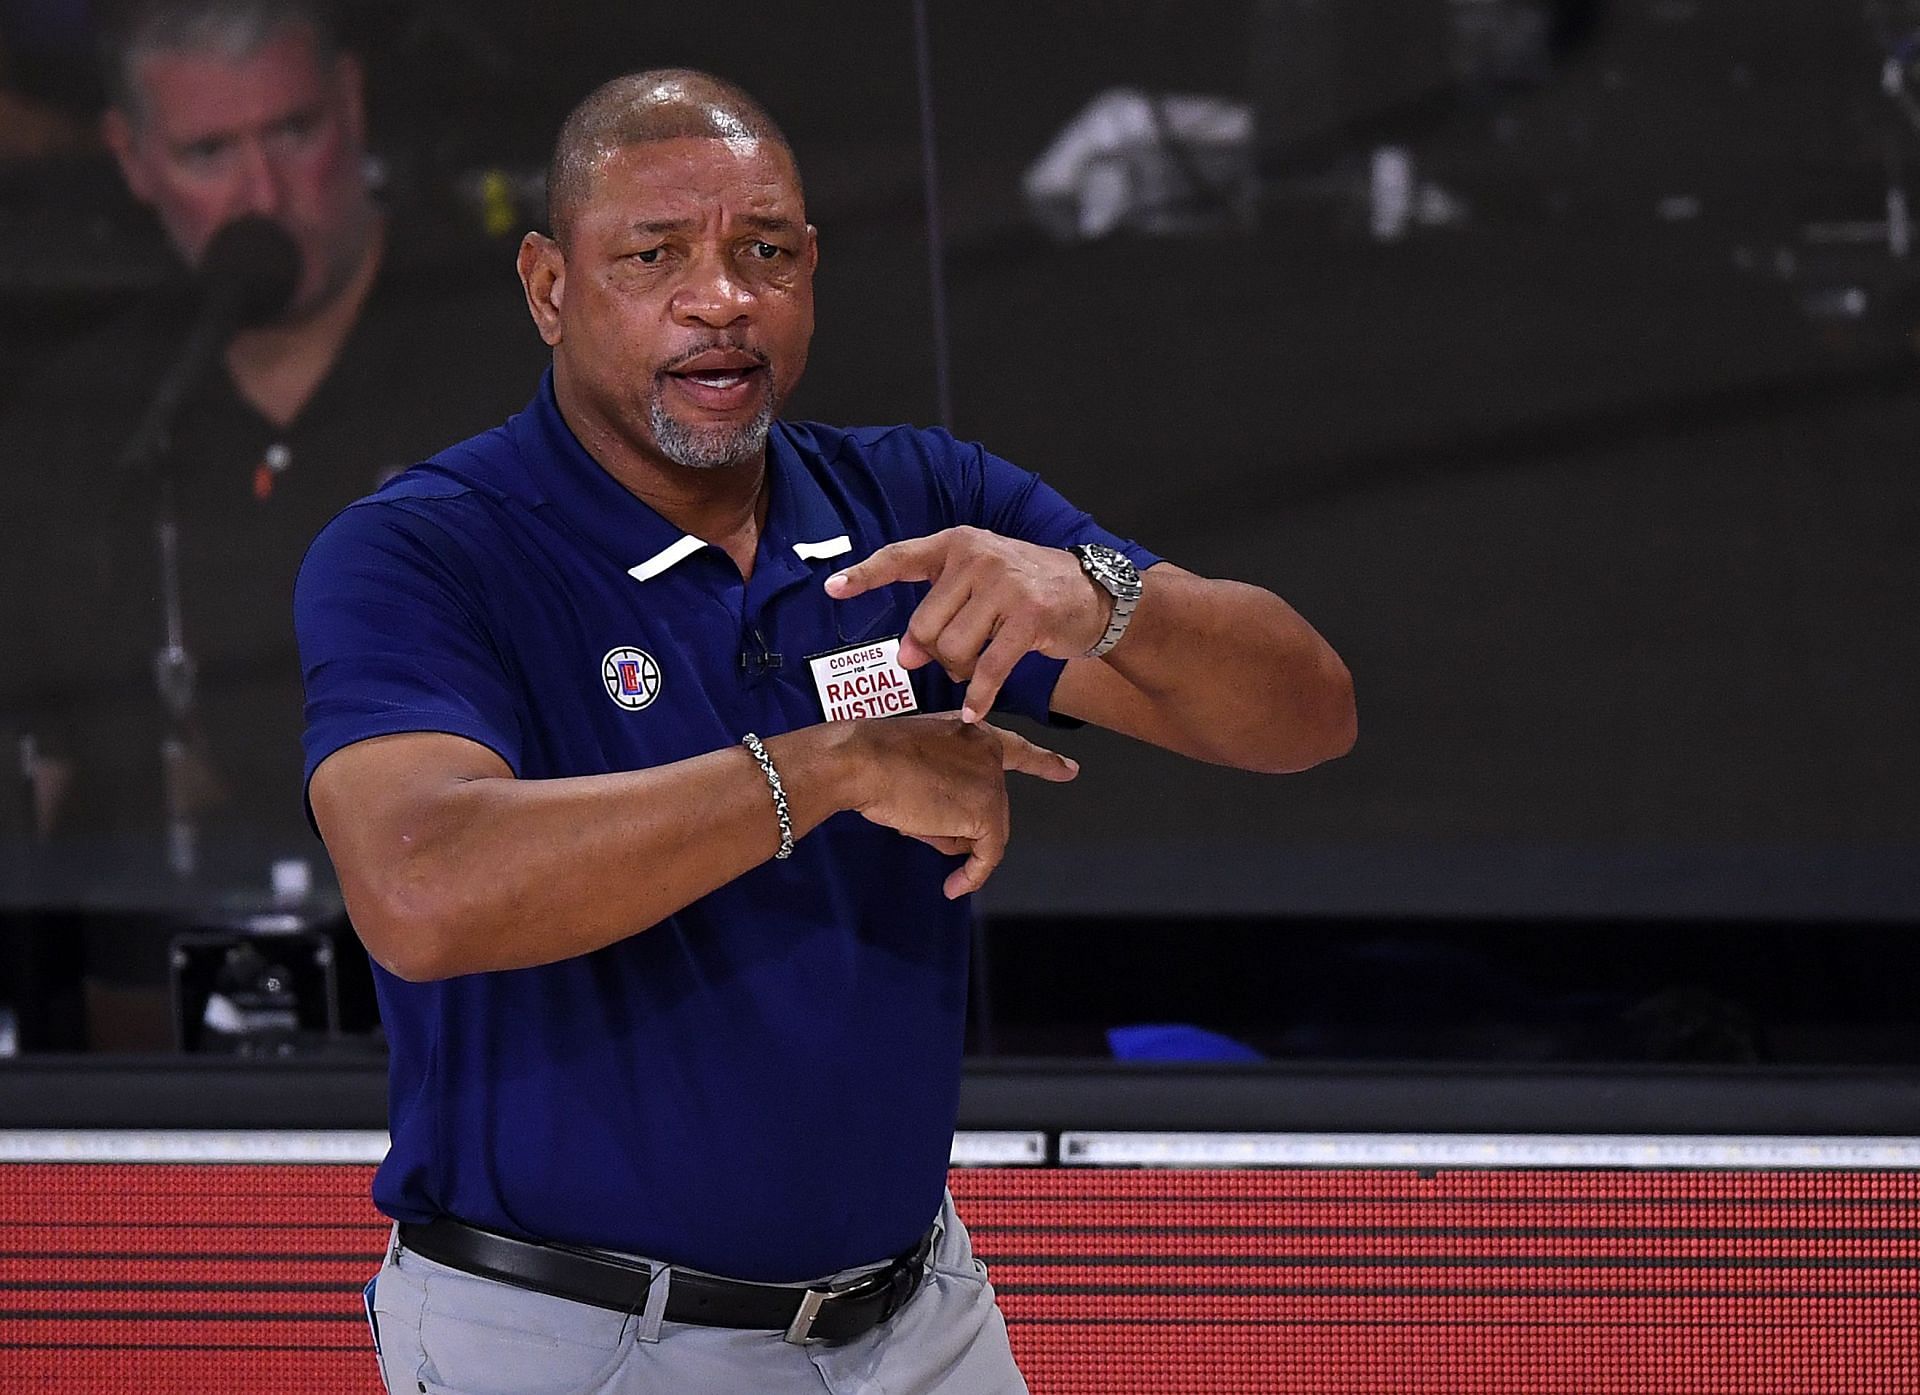 Doc Rivers is a Hall of Fame level coach